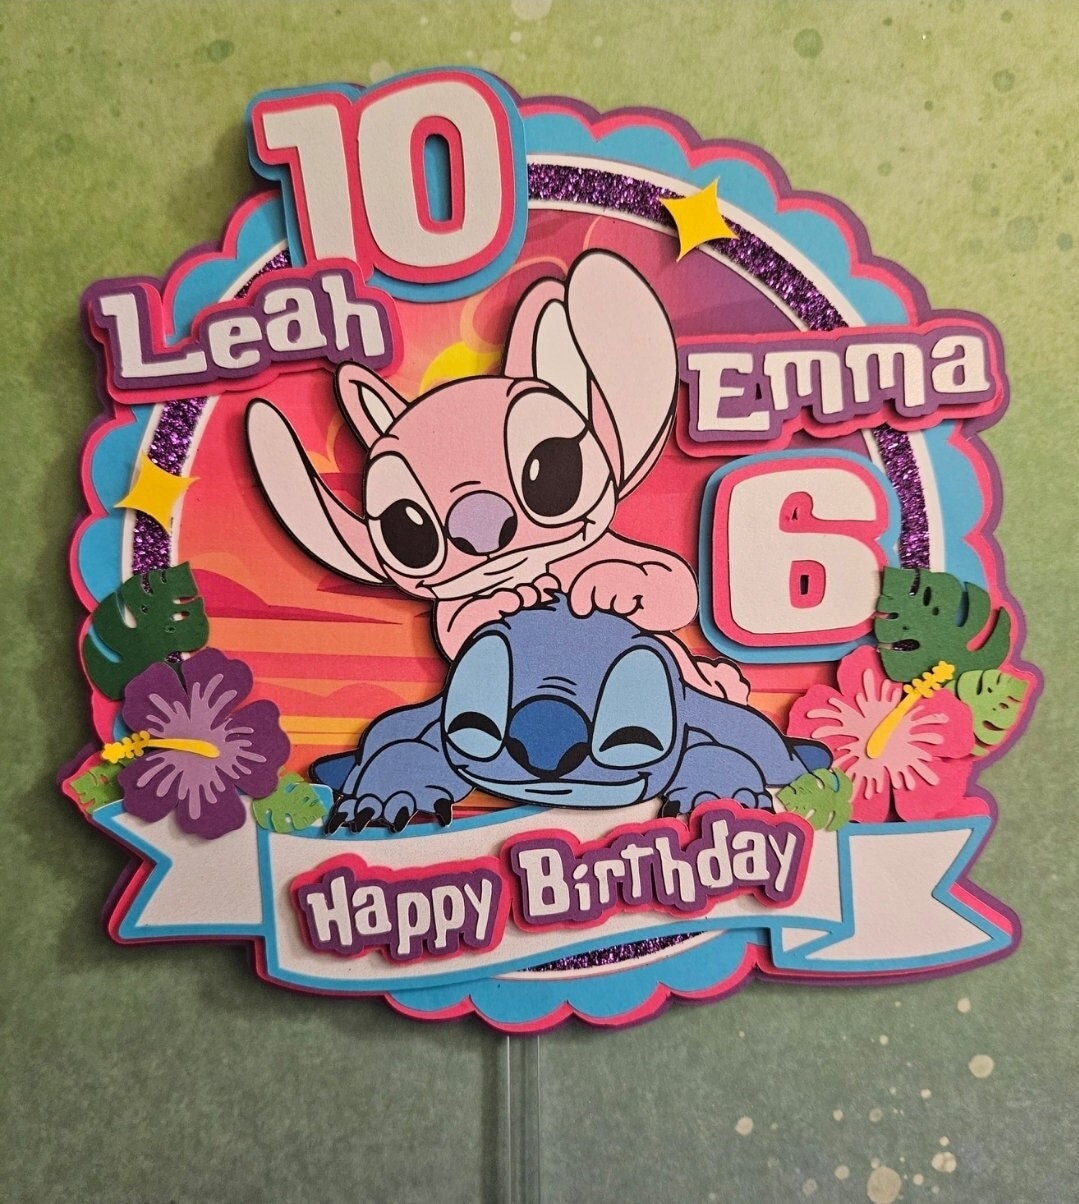 Lilo Stitch Angel Experiment 624 Pink Edible Image Cake Topper Personalized  Birthday Sheet Decoration Custom Party Frosting Transfer Fondant